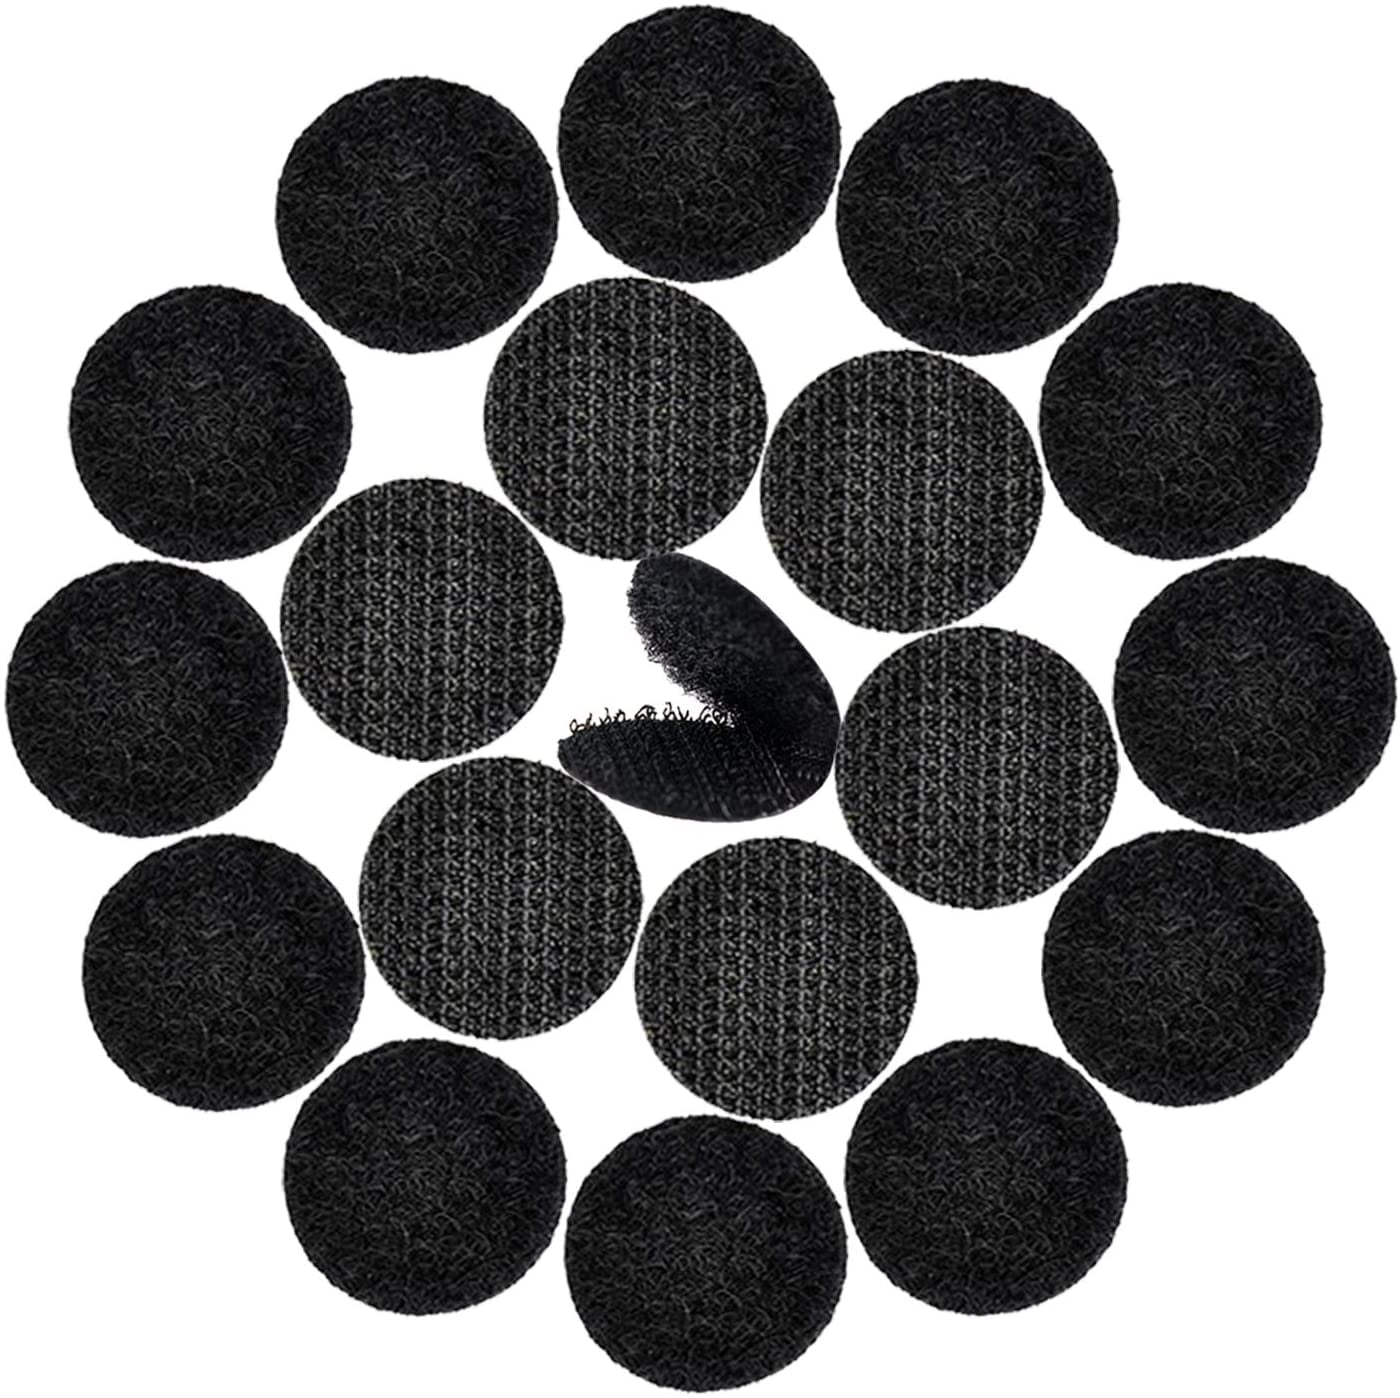 Bigger Round Size Self Adhesive 6 Pack 4 inch Hook Loop Tape Dots with Super Sticky Back Mounting Tape Removable Perfect for Home or Office 4 inch Diameter, Black 